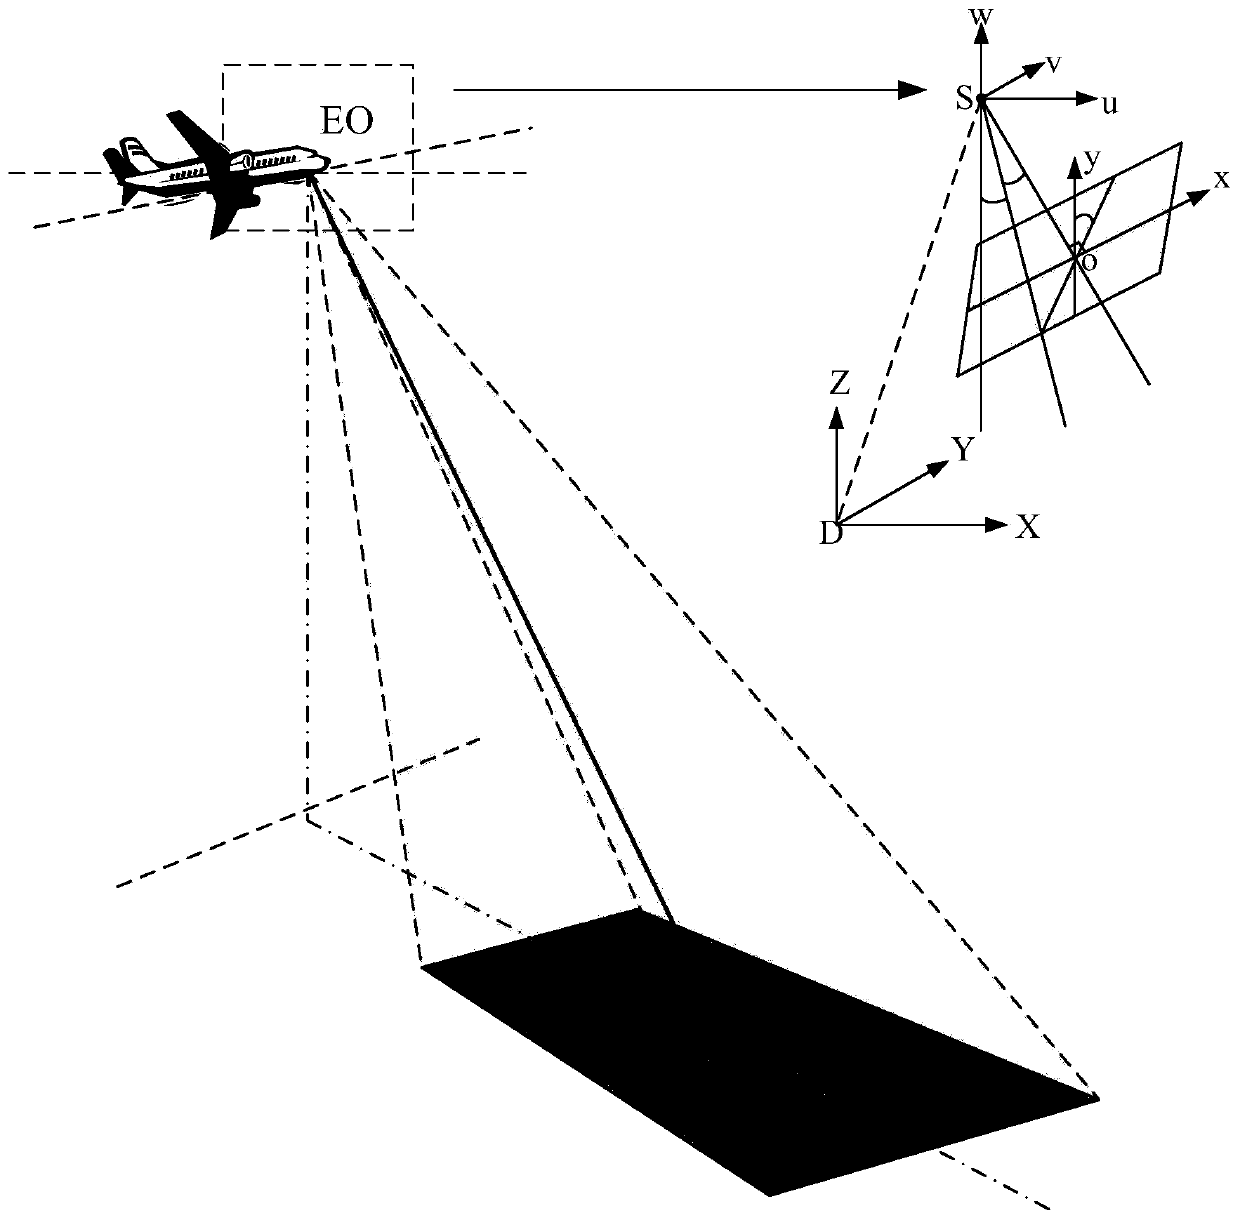 Airborne photoelectric system target motion vector estimation method based on aerial photography measurement